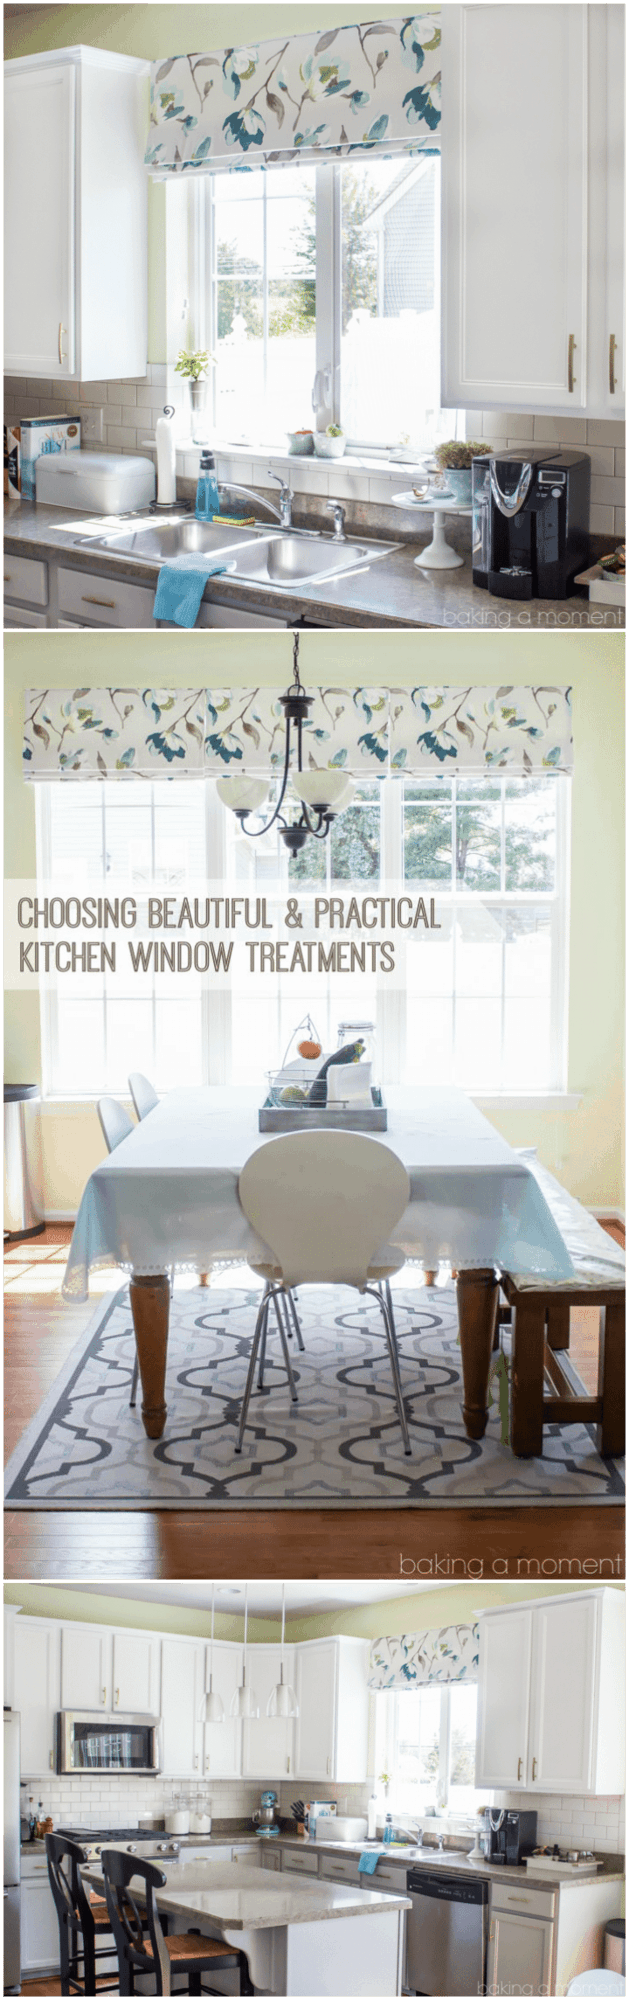 How to Choose Kitchen Window Treatments that are Beautiful and Practical | Baking a Moment